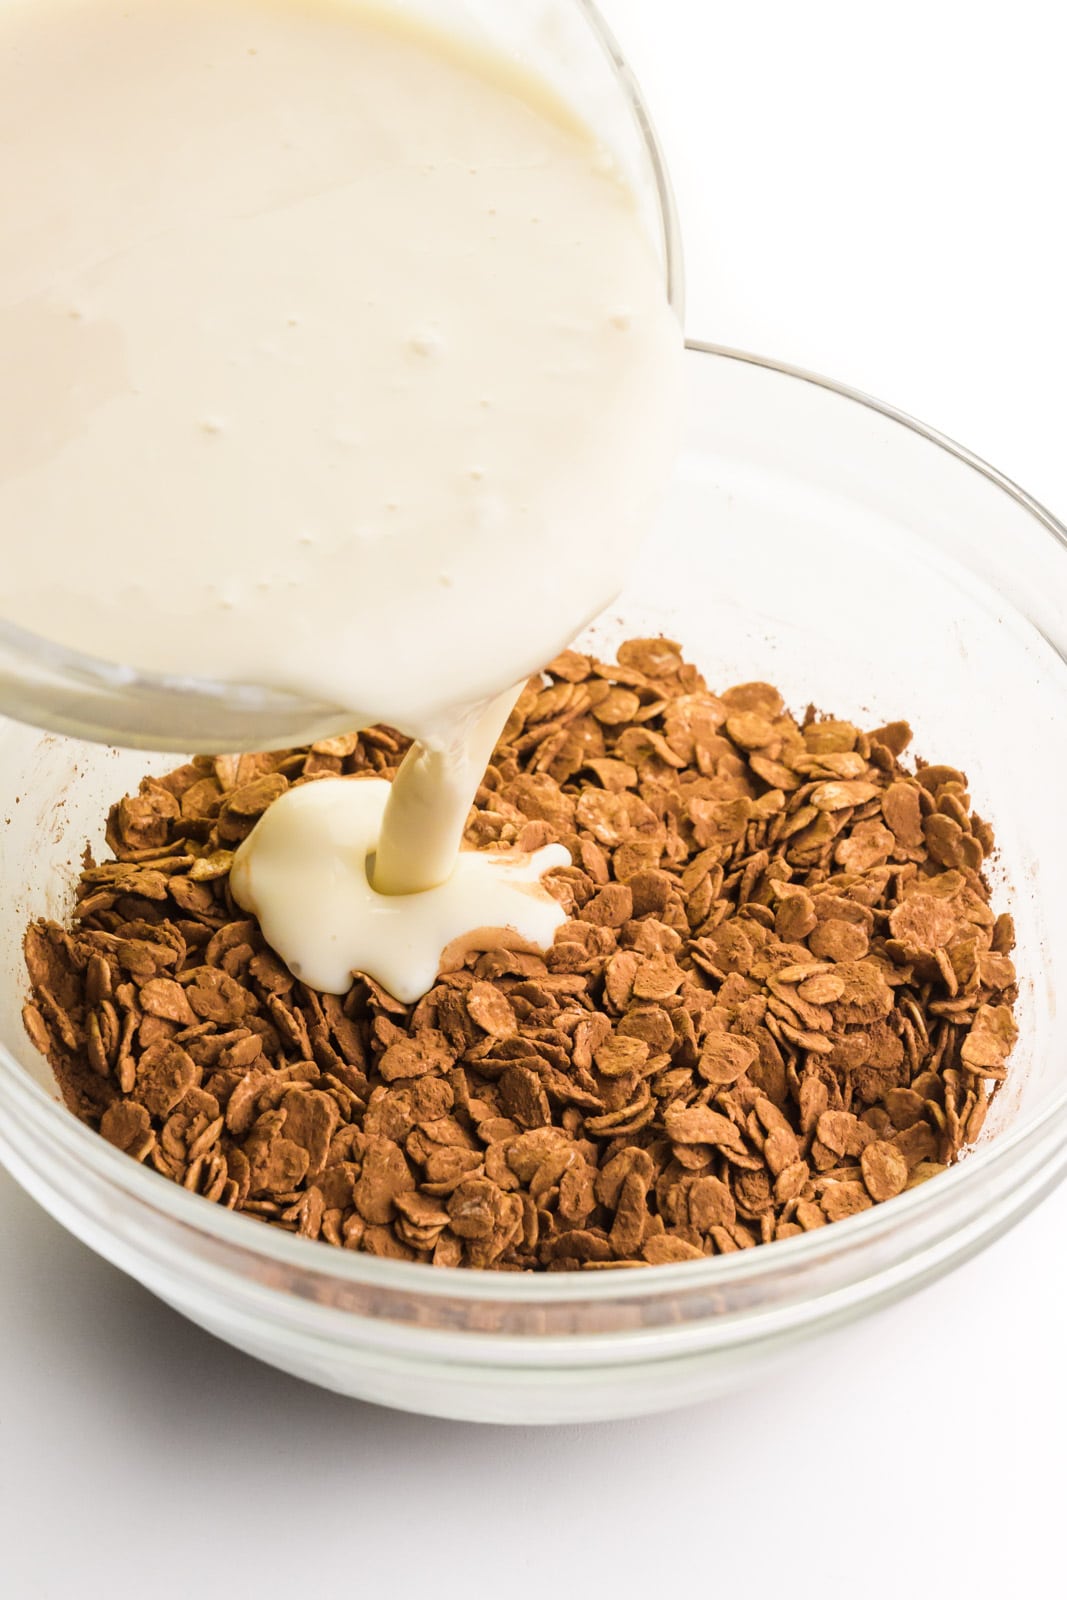 A creamy milk mixture is being poured into a bowl with oats stirred together with cocoa powder.